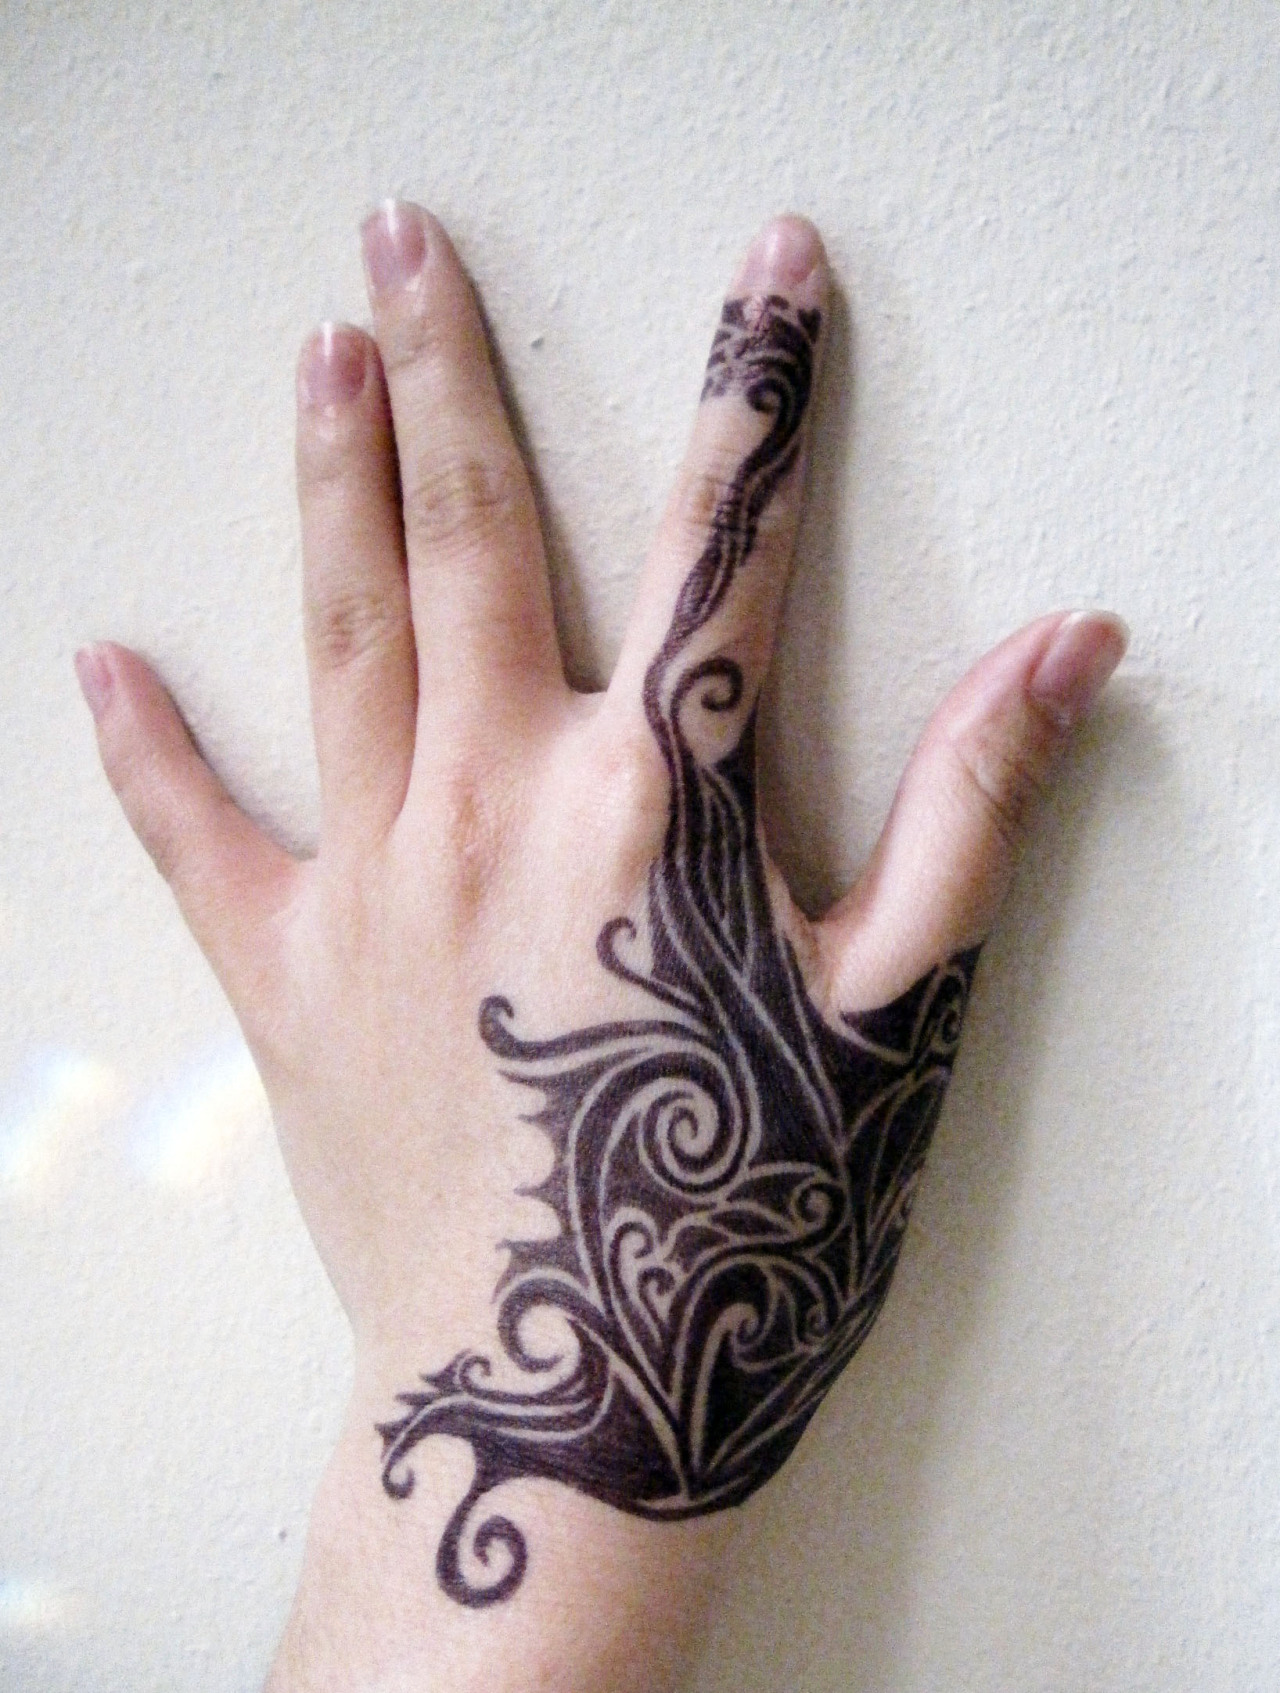 40 Cool designs I want to draw on my hand in pen ideas  cool tattoos  tattoos tattoo designs